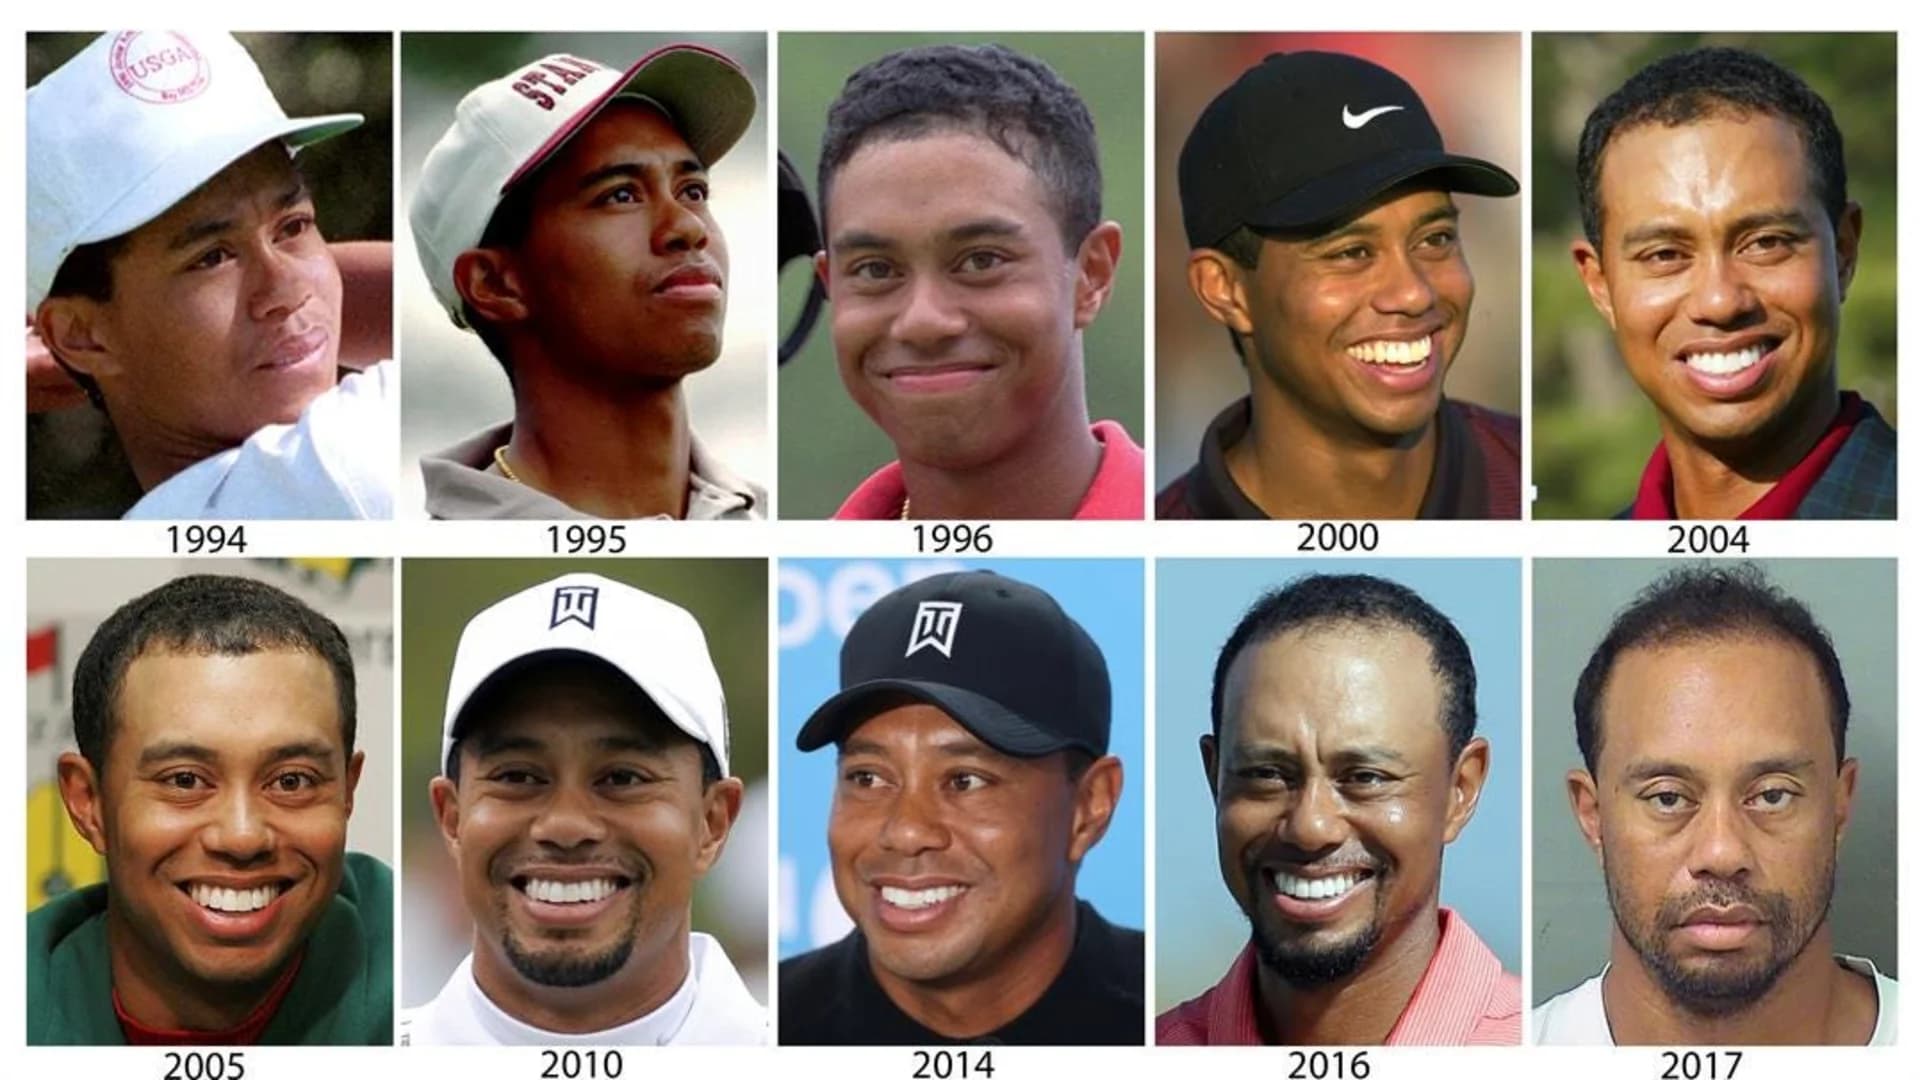 Professional career of Tiger Woods